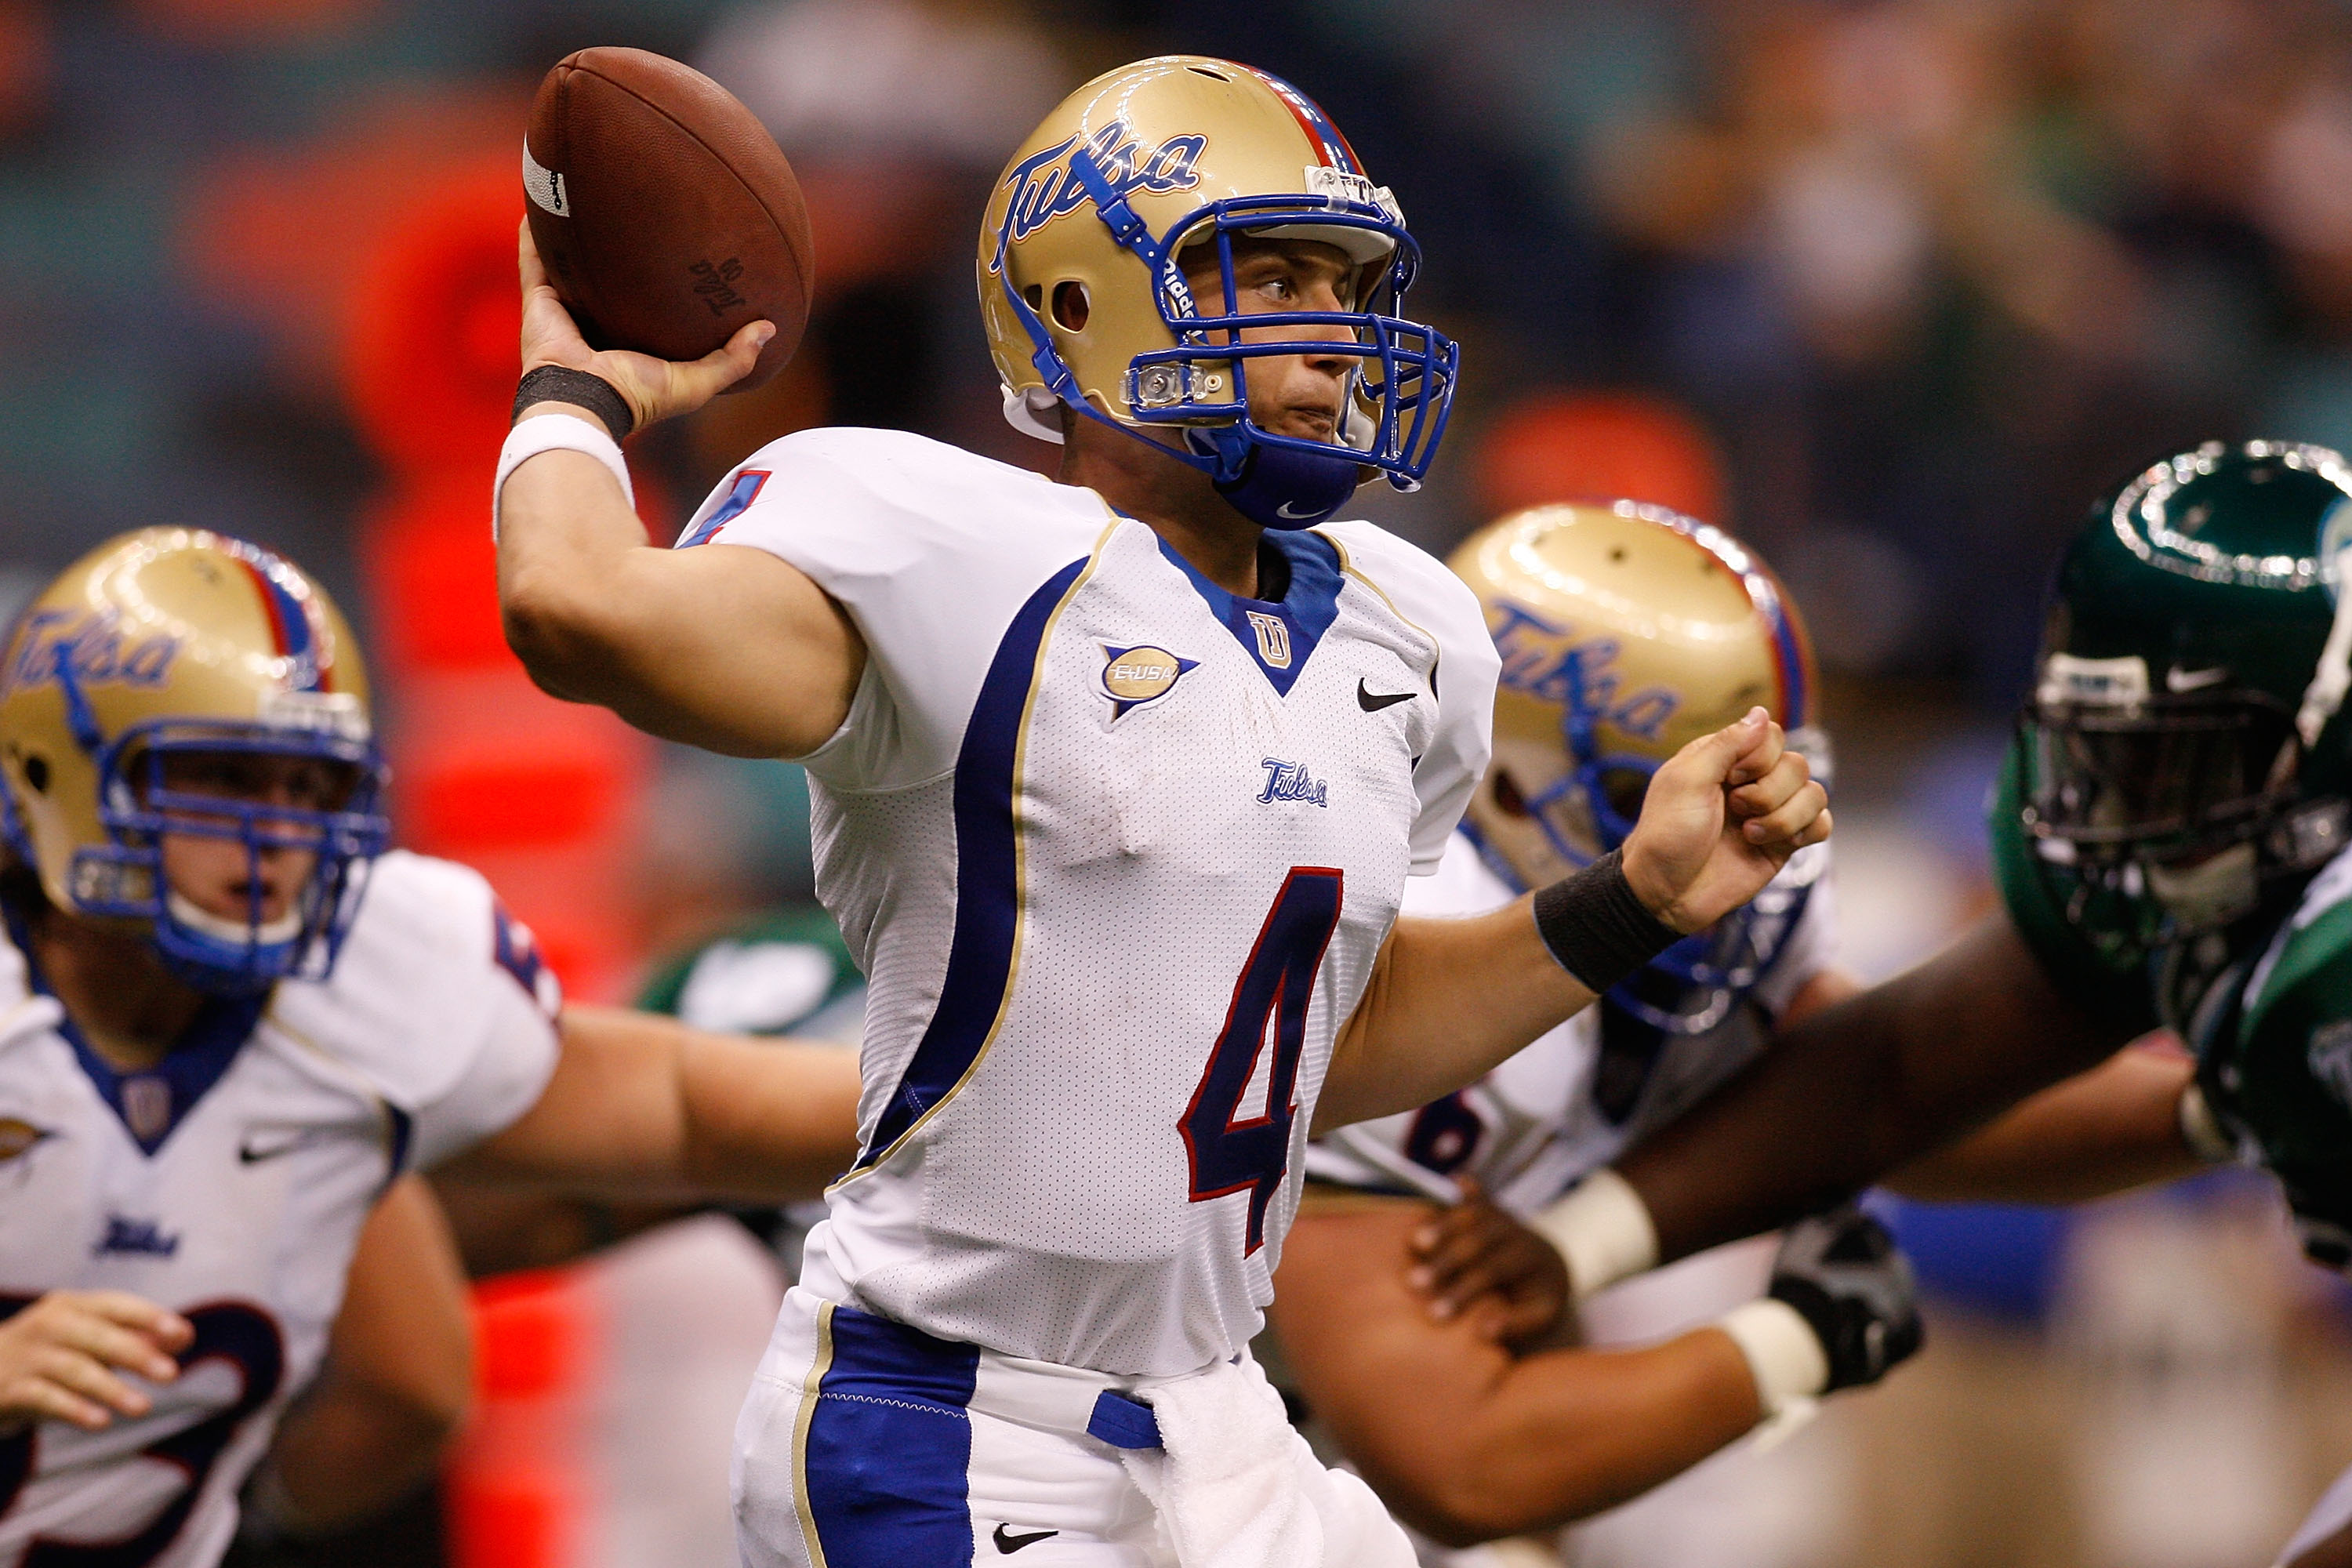 NEW ORLEANS - SEPTEMBER 04:  Quarterback G.J. Kinne #4 of the Tulsa Golden Hurricanes throws a pass against the Tulane Green Wave at the Louisiana Superdome on September 4, 2009 in New Orleans, Louisiana.   The Hurricanes defeated the Green Wave 37-13.  (